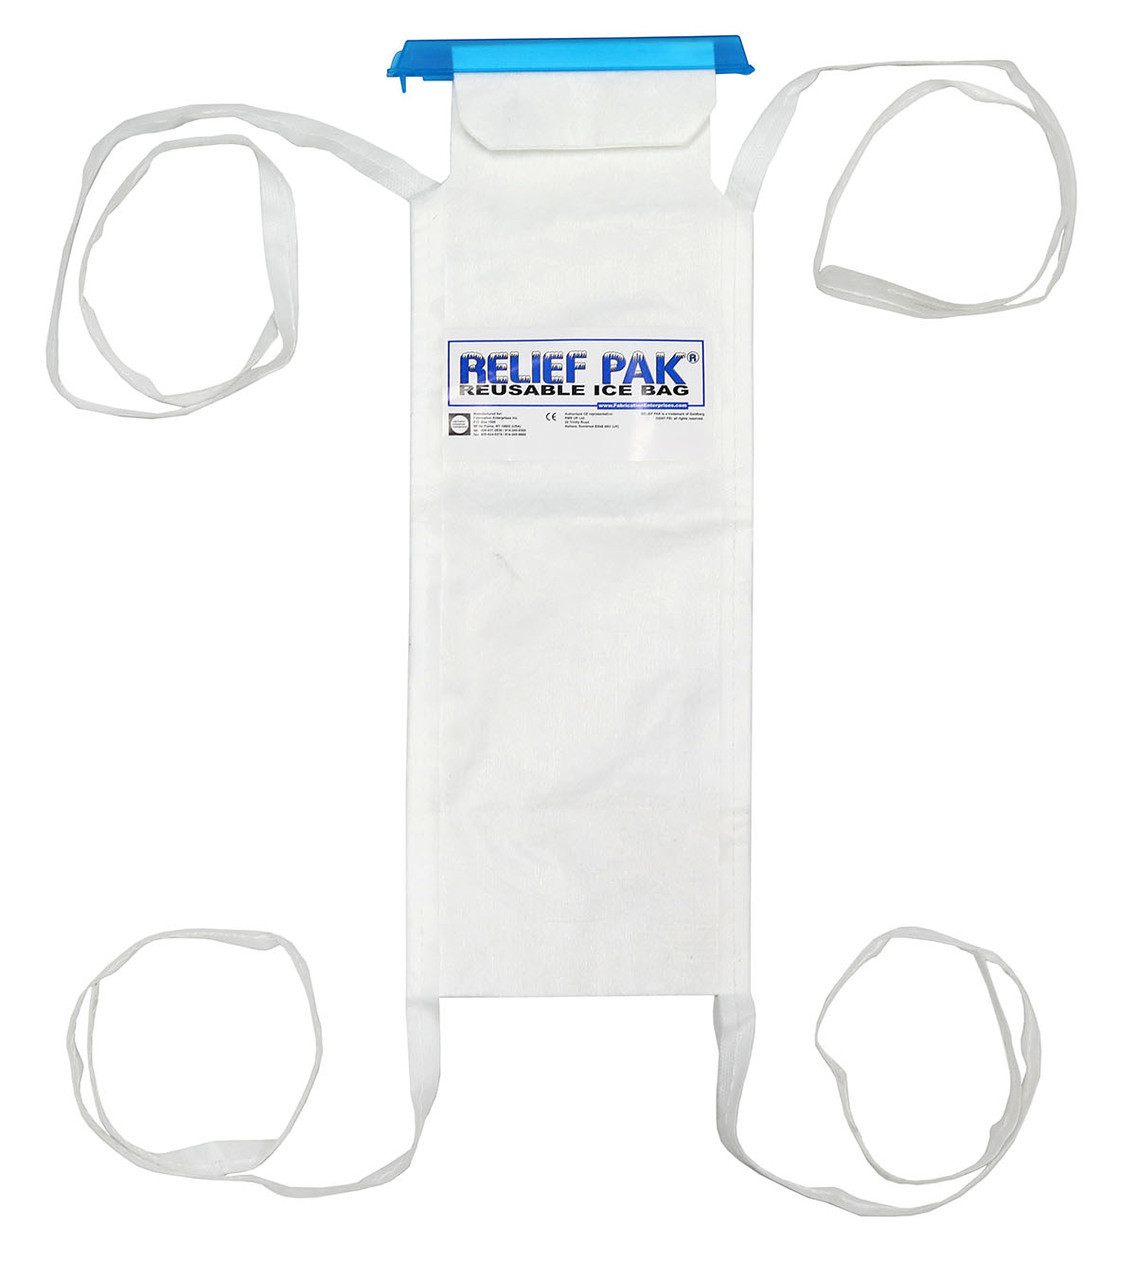 Relief Pak Insulated Ice Bag - Tie Strings - small - 5" x 13" - Case of 10